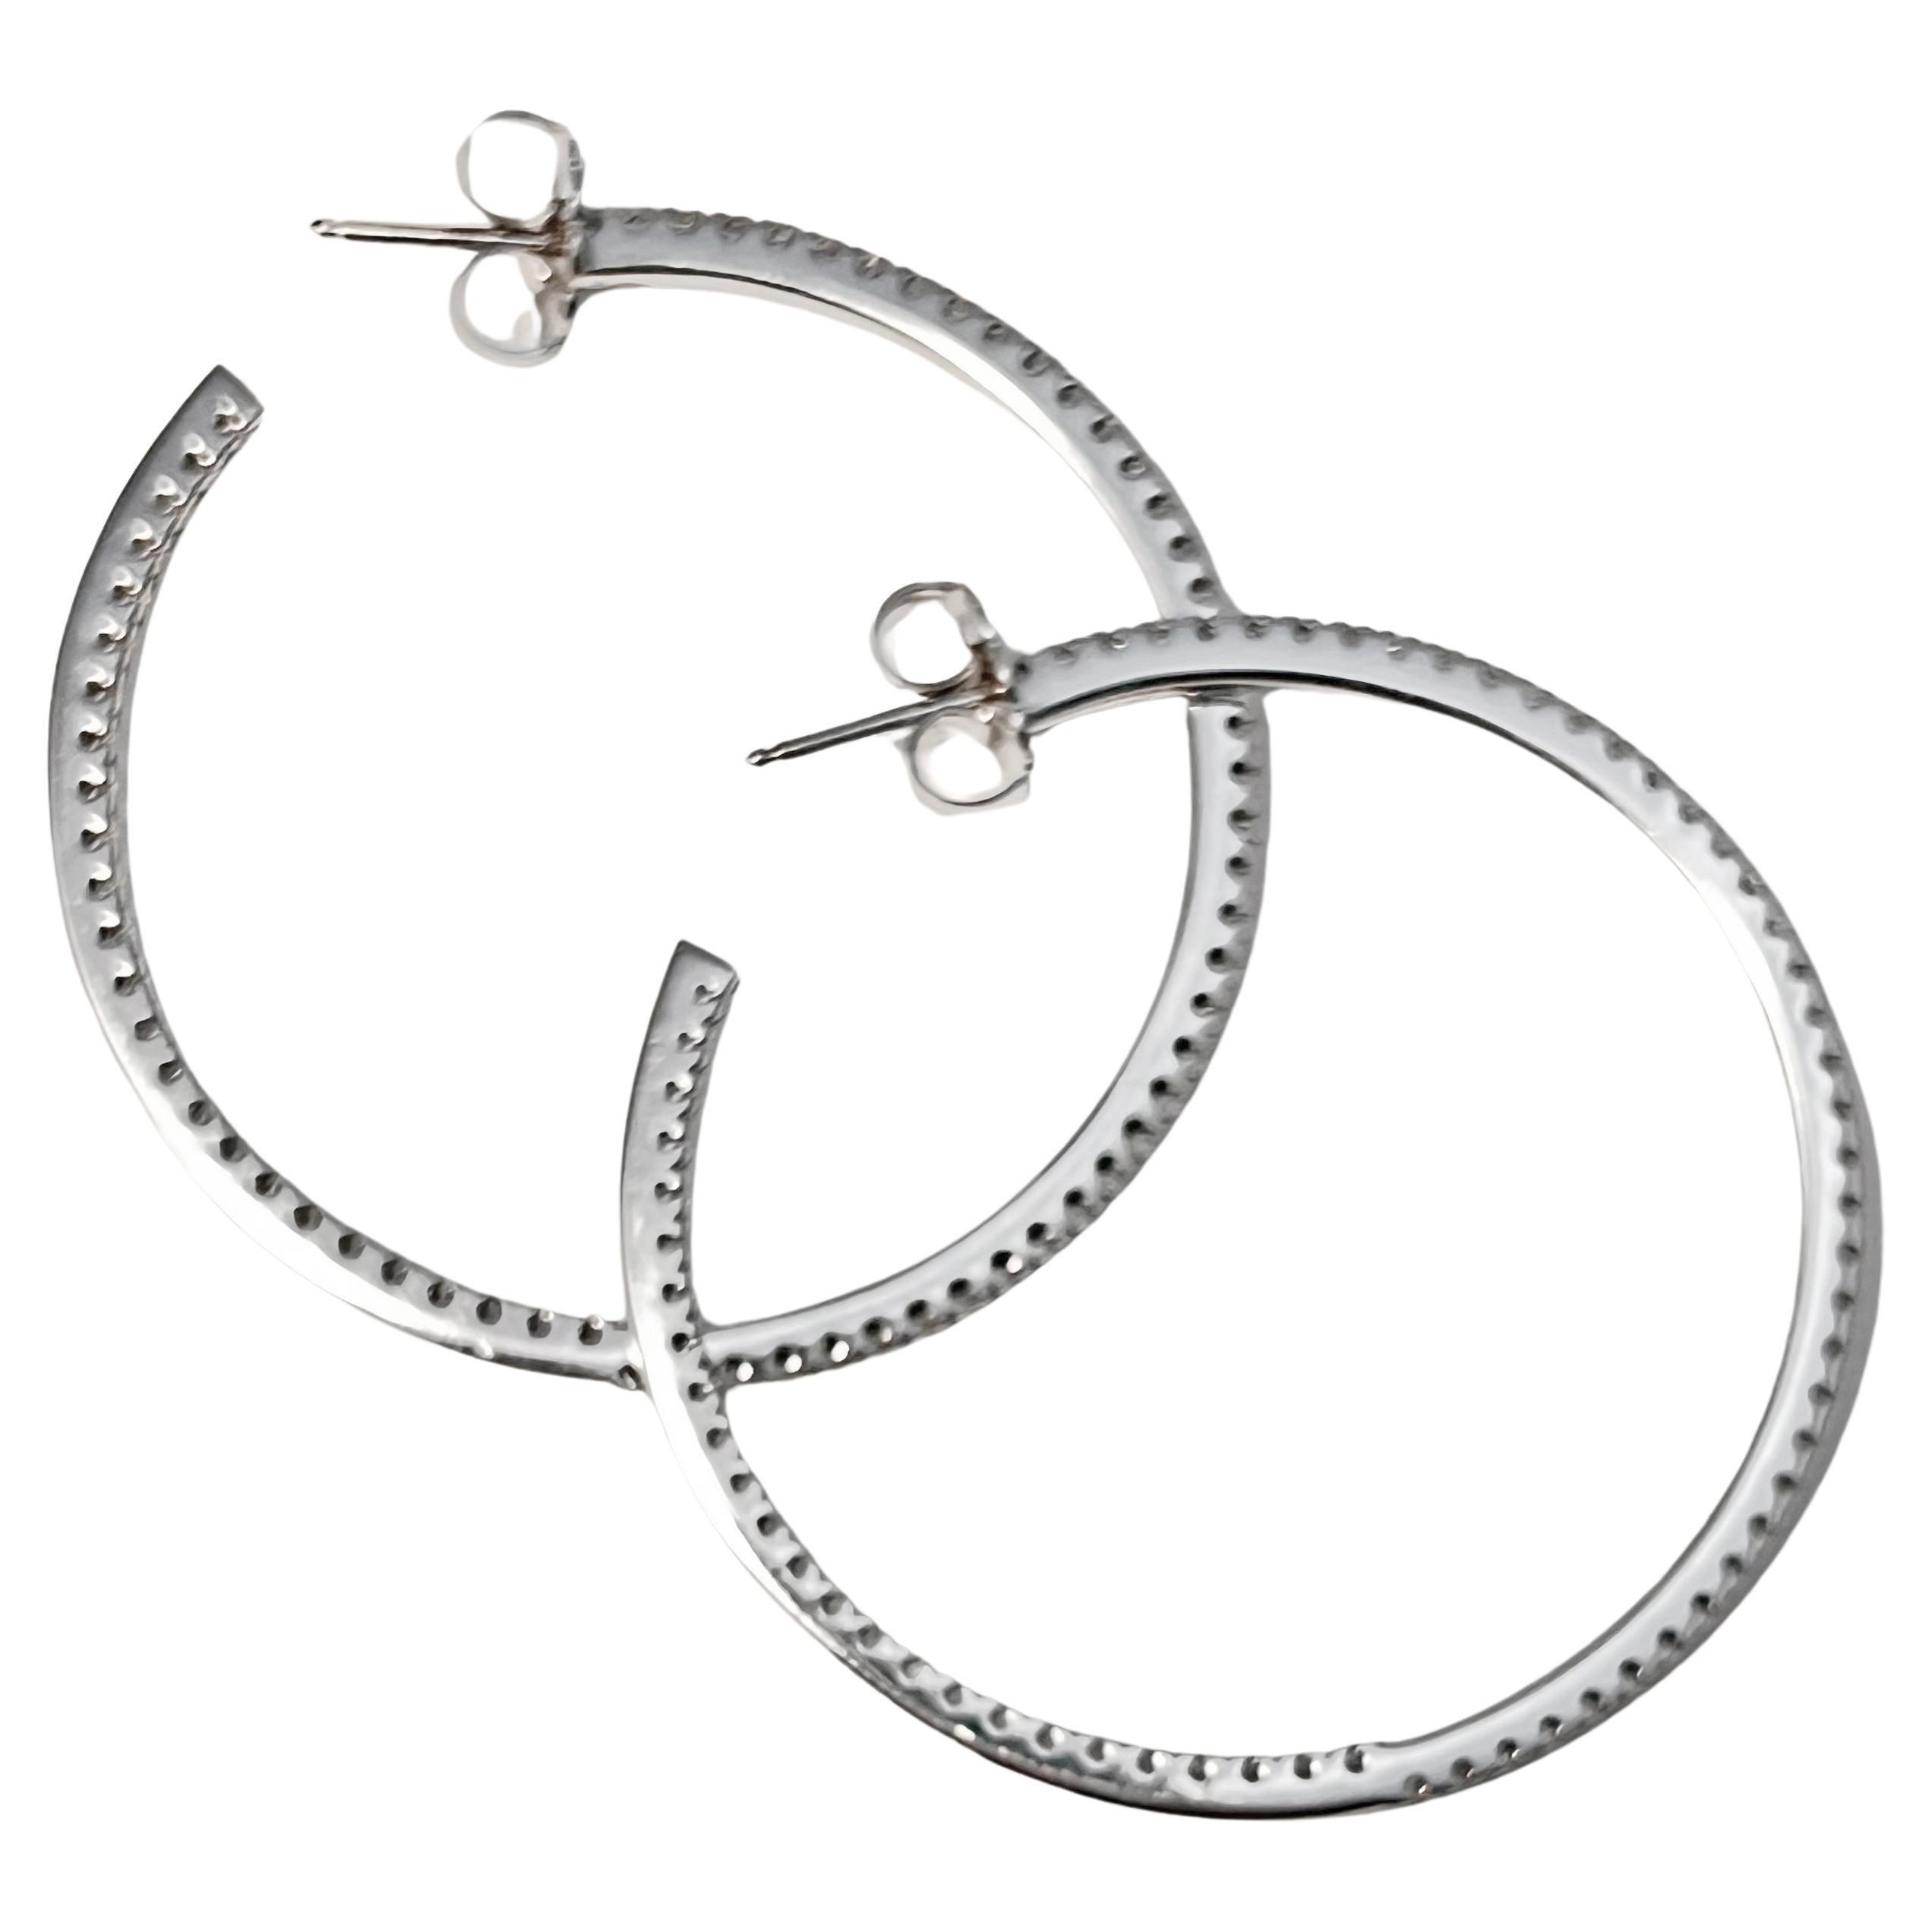 Gucci 18k white gold 'inside out' diamond hoop earrings, featuring one hundred thirty-two round brilliant cut diamonds weighing approximately 1.32 carats (F-G color, VS1-VS2 clarity).  50mm diameter (2